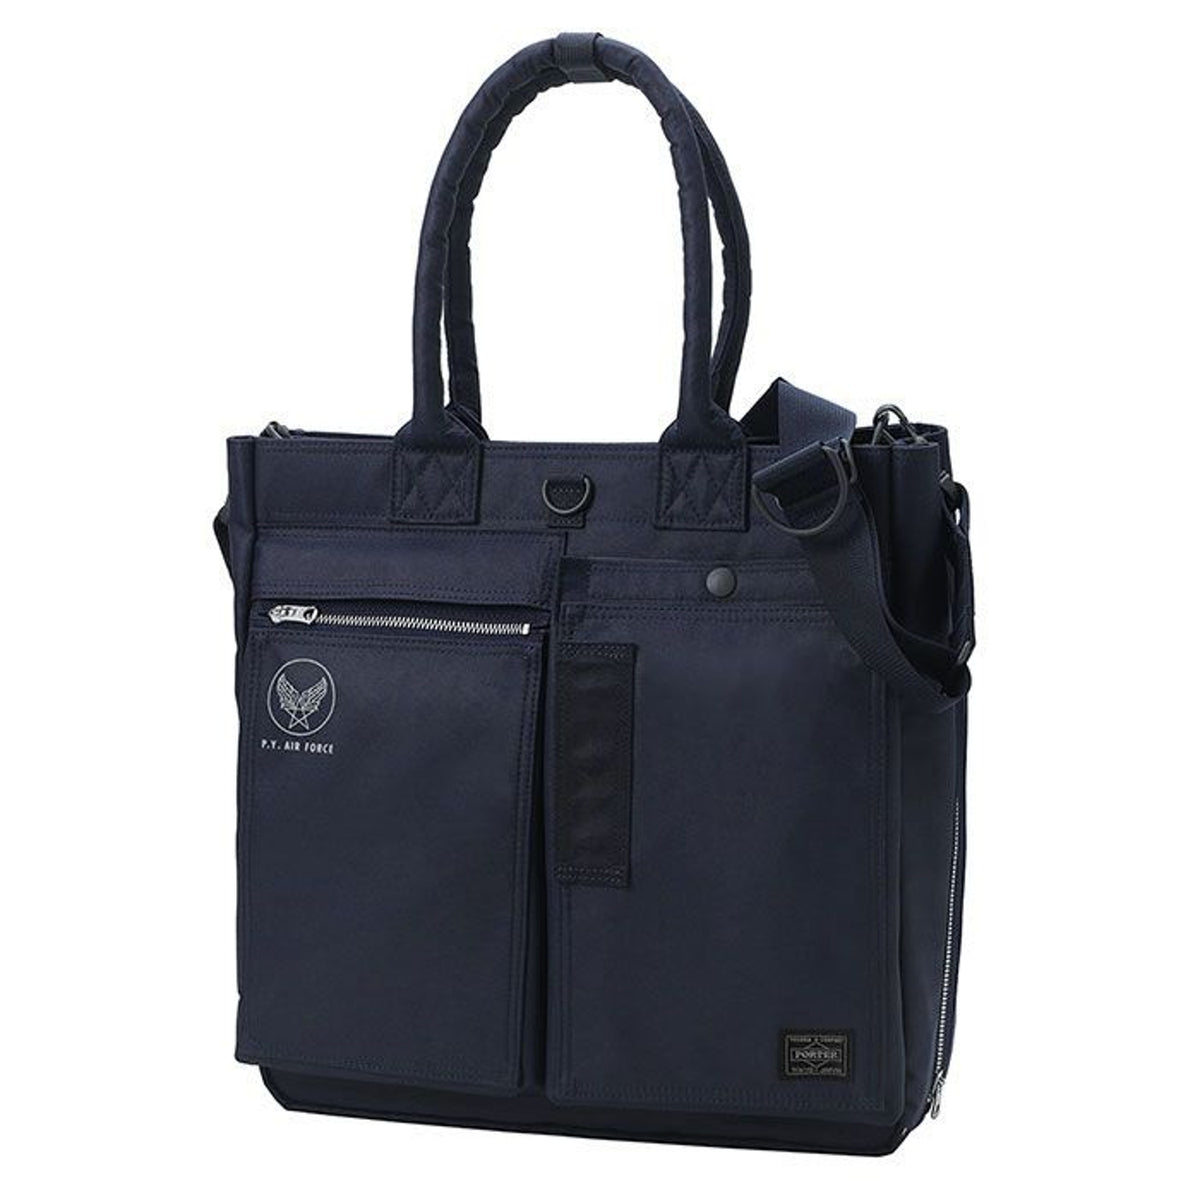 PORTER FLYING ACE 2WAY TOTE BAG [ 863-17040 ] – cotwohk